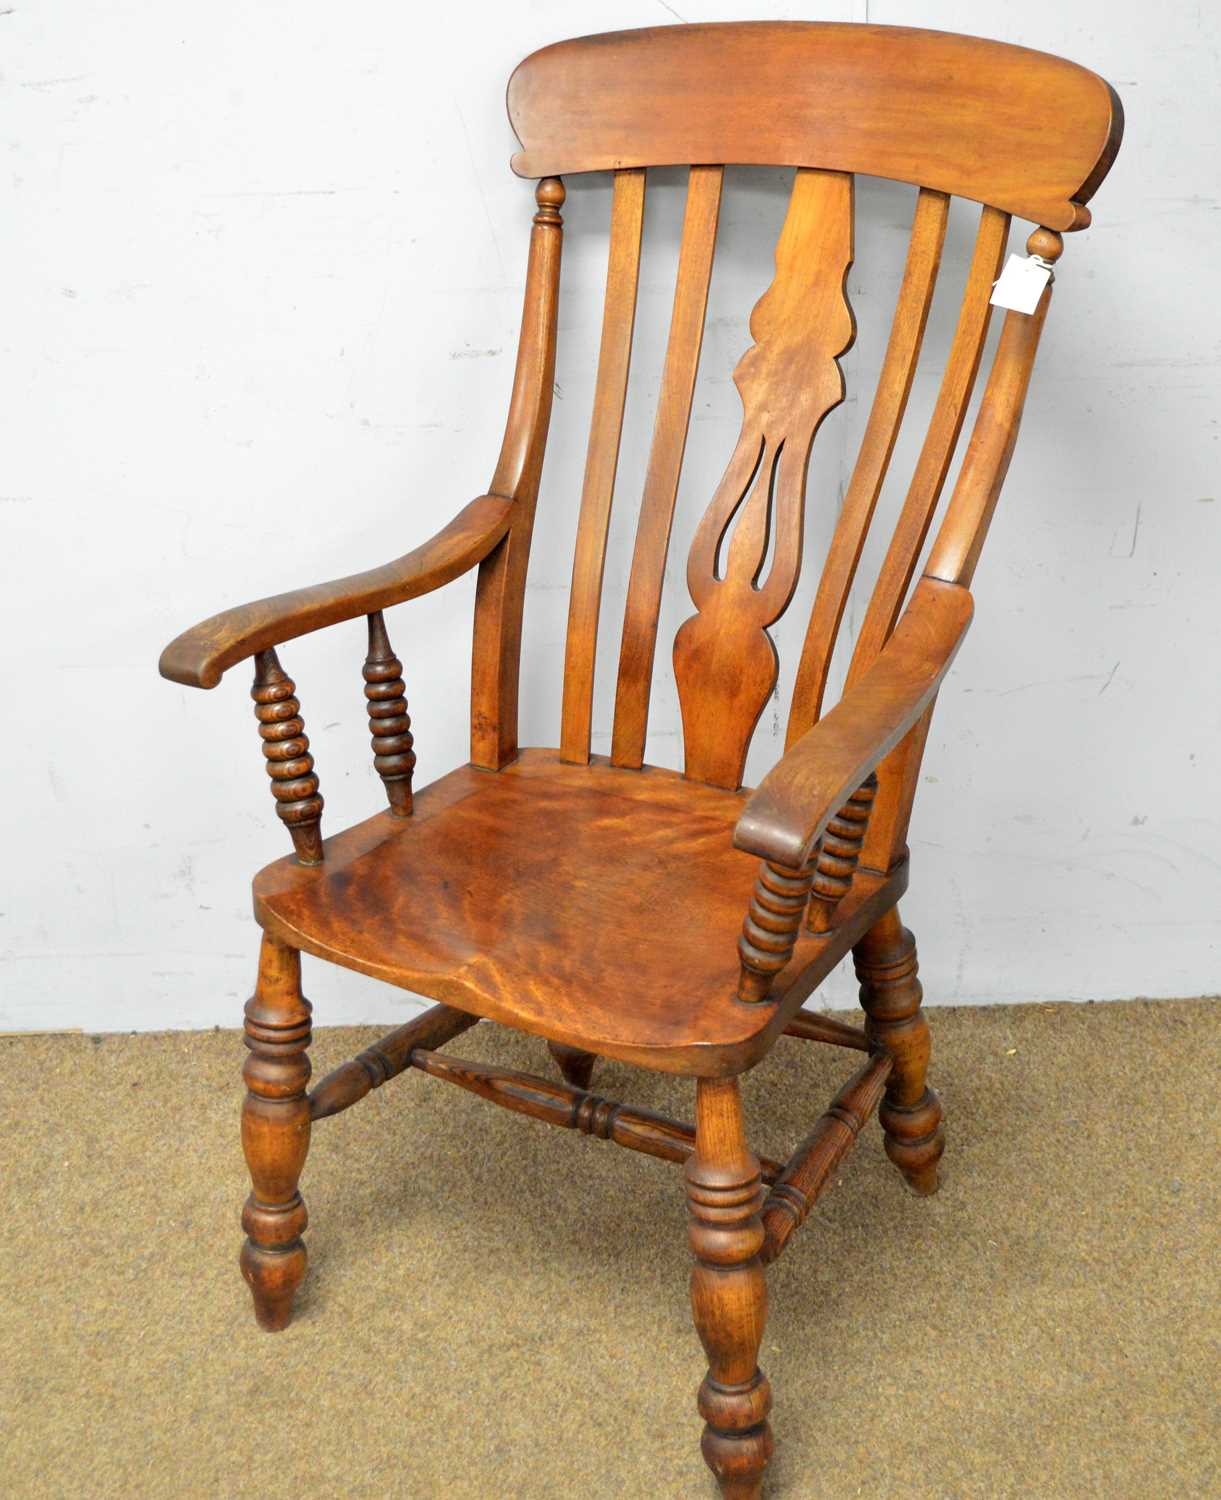 A late 19th Century rustic Windsor style armchair